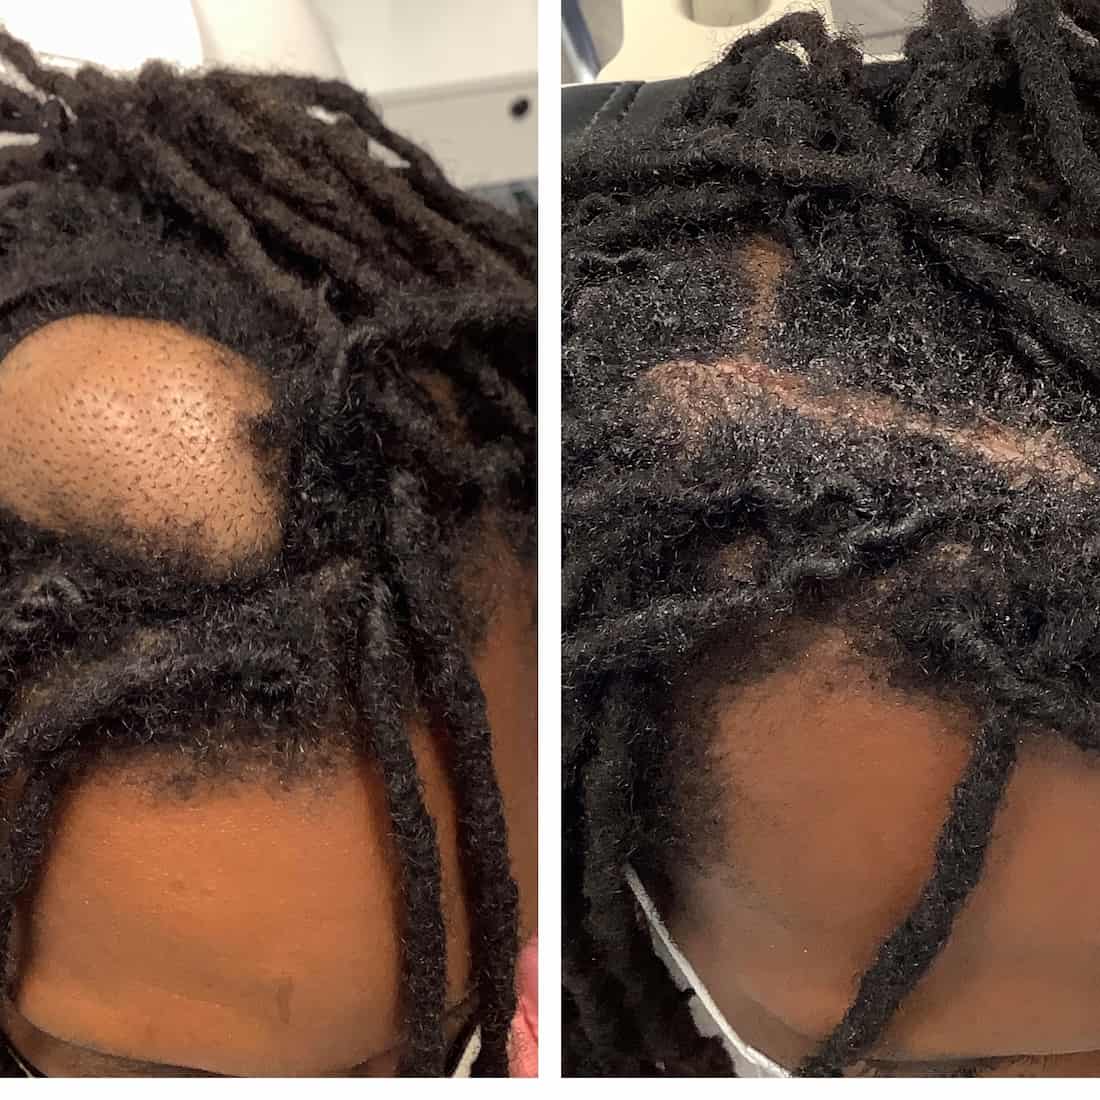 Cyst on scalp before and after